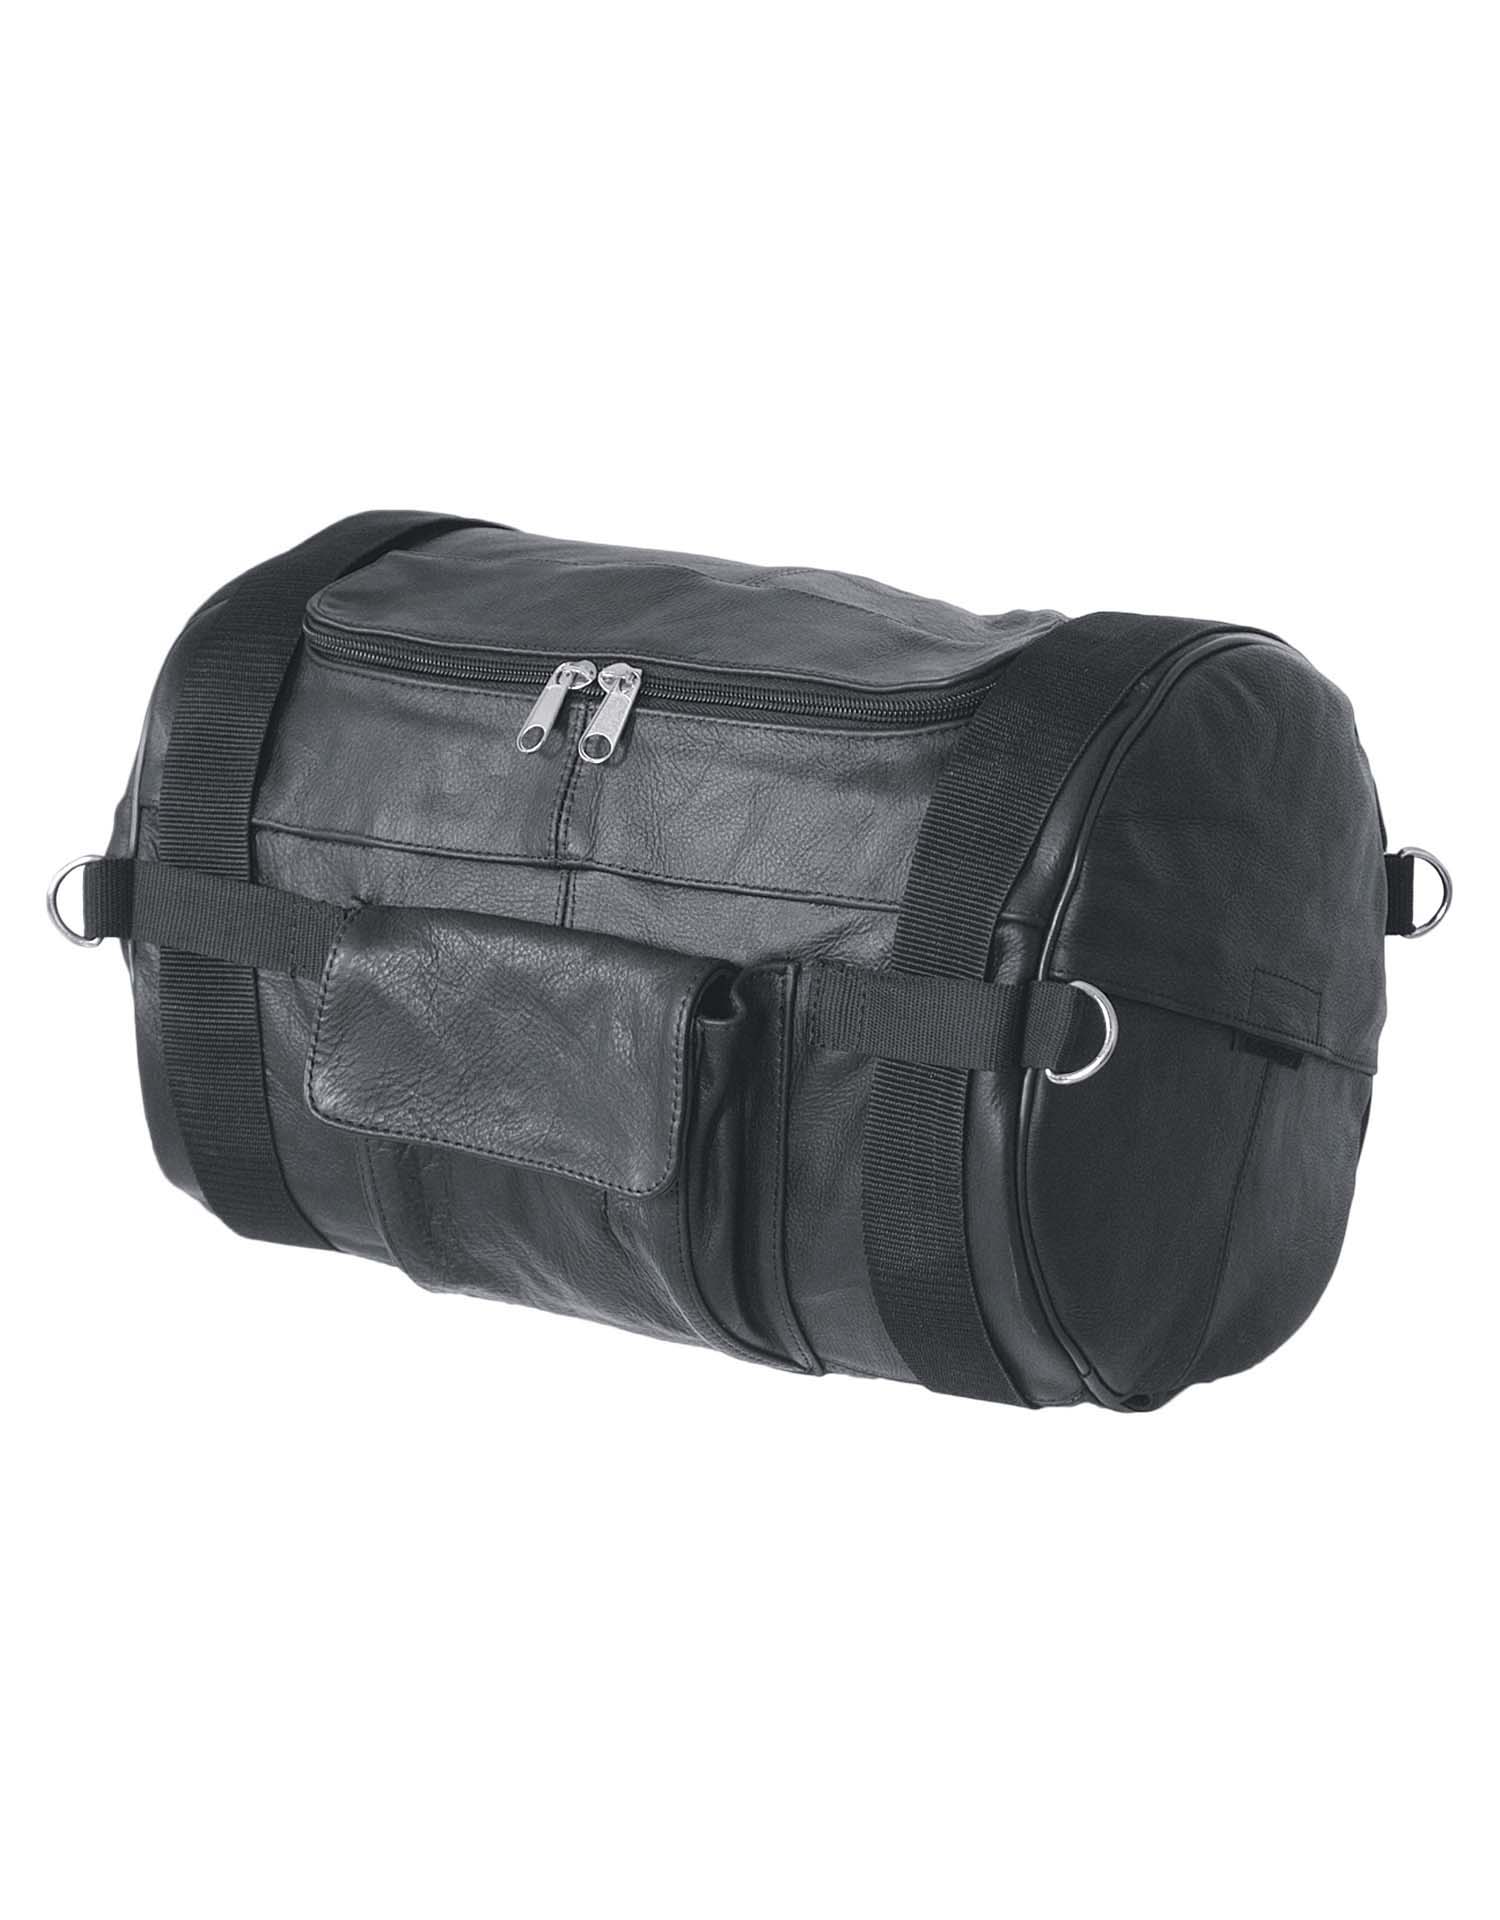 Black Leather Duffel Bag with Rain Cover, 14â€W x 10â€H